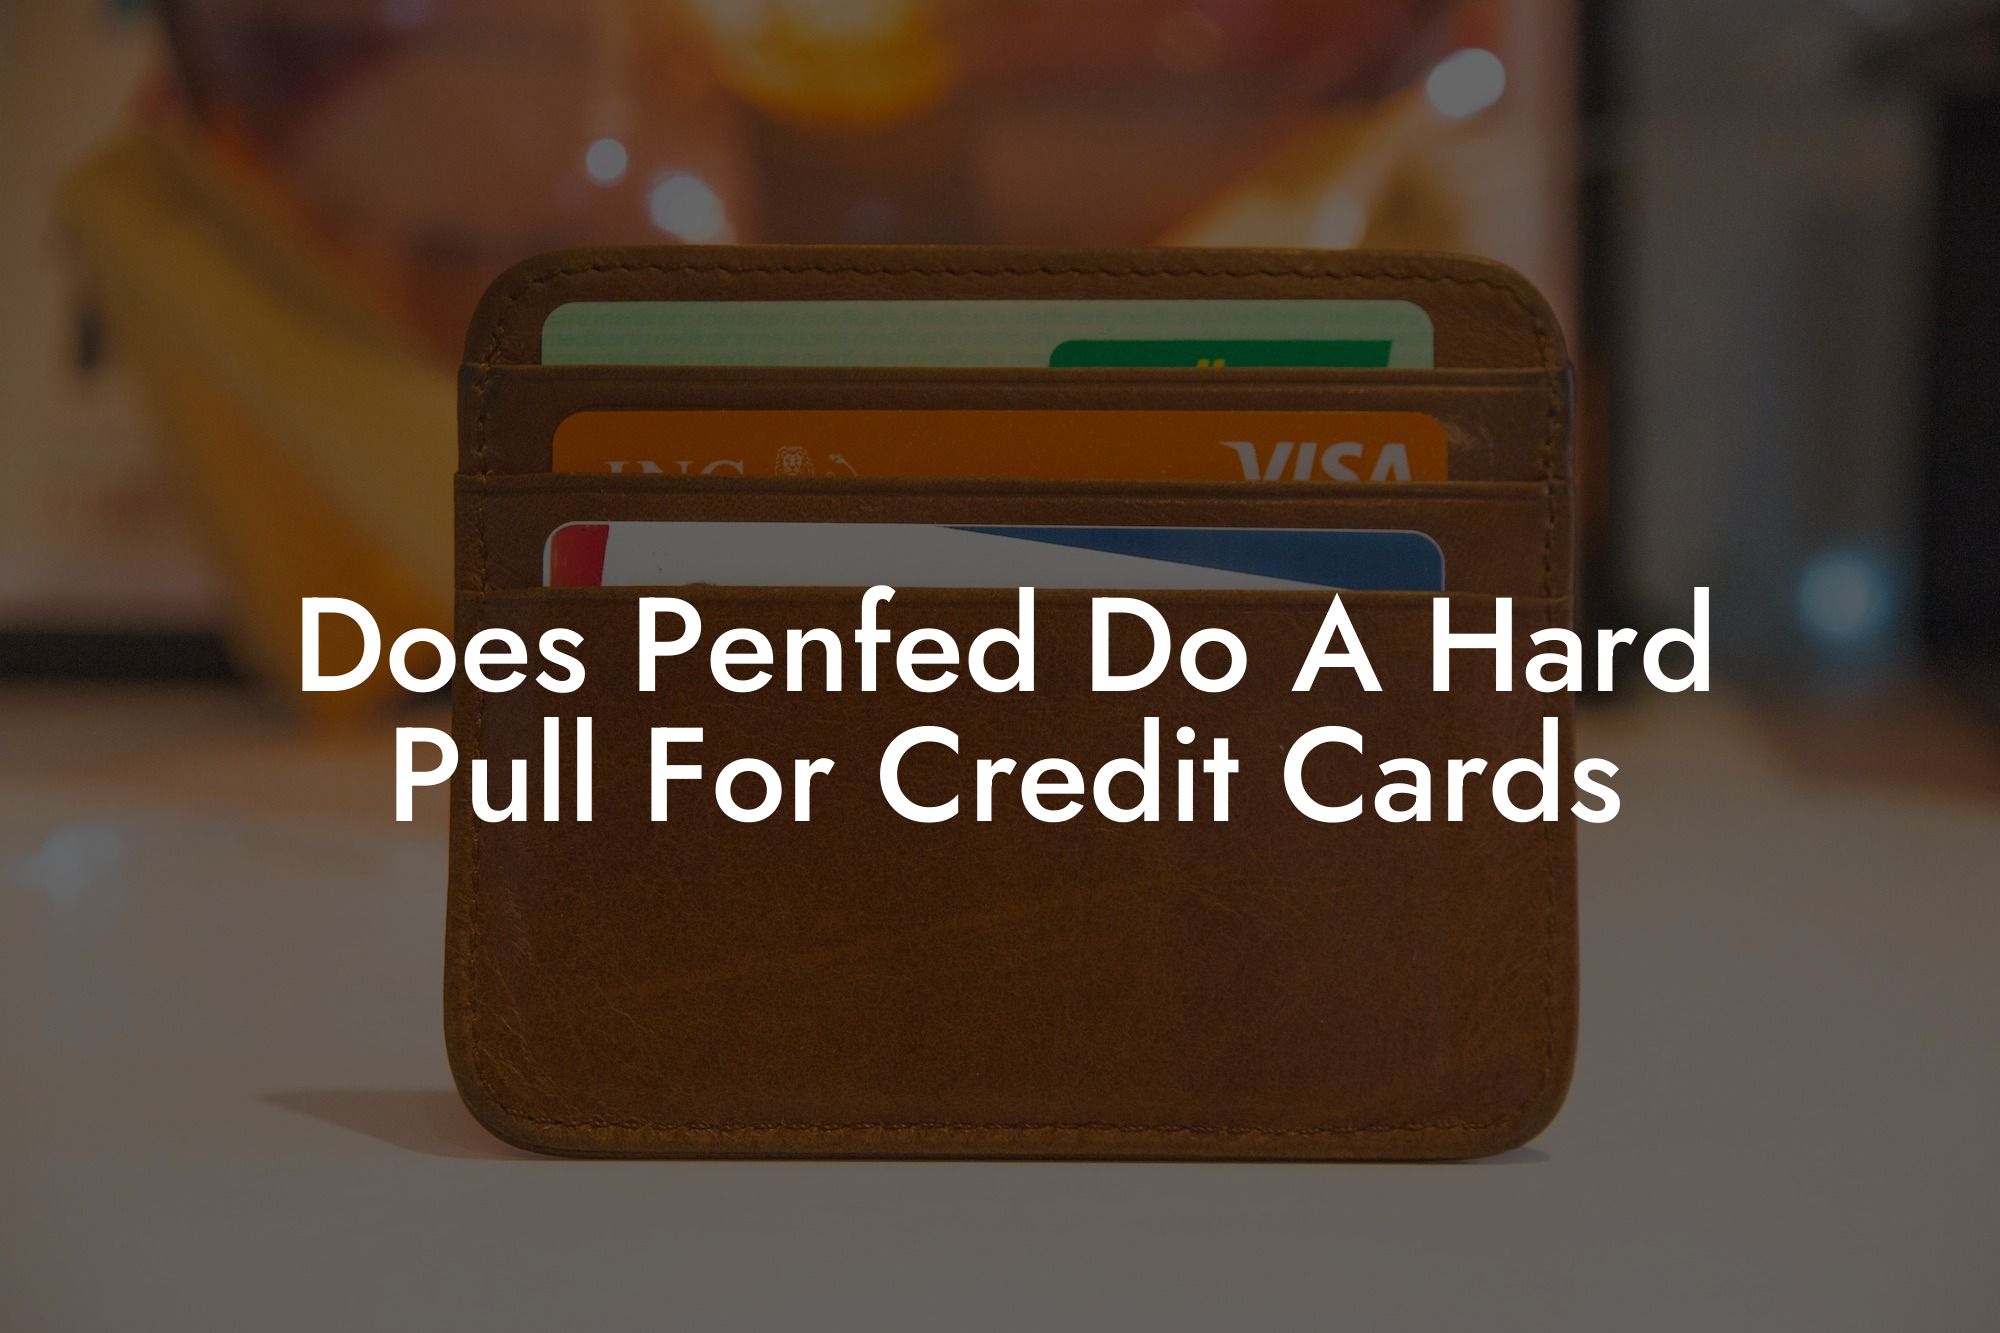 Does Penfed Do A Hard Pull For Credit Cards